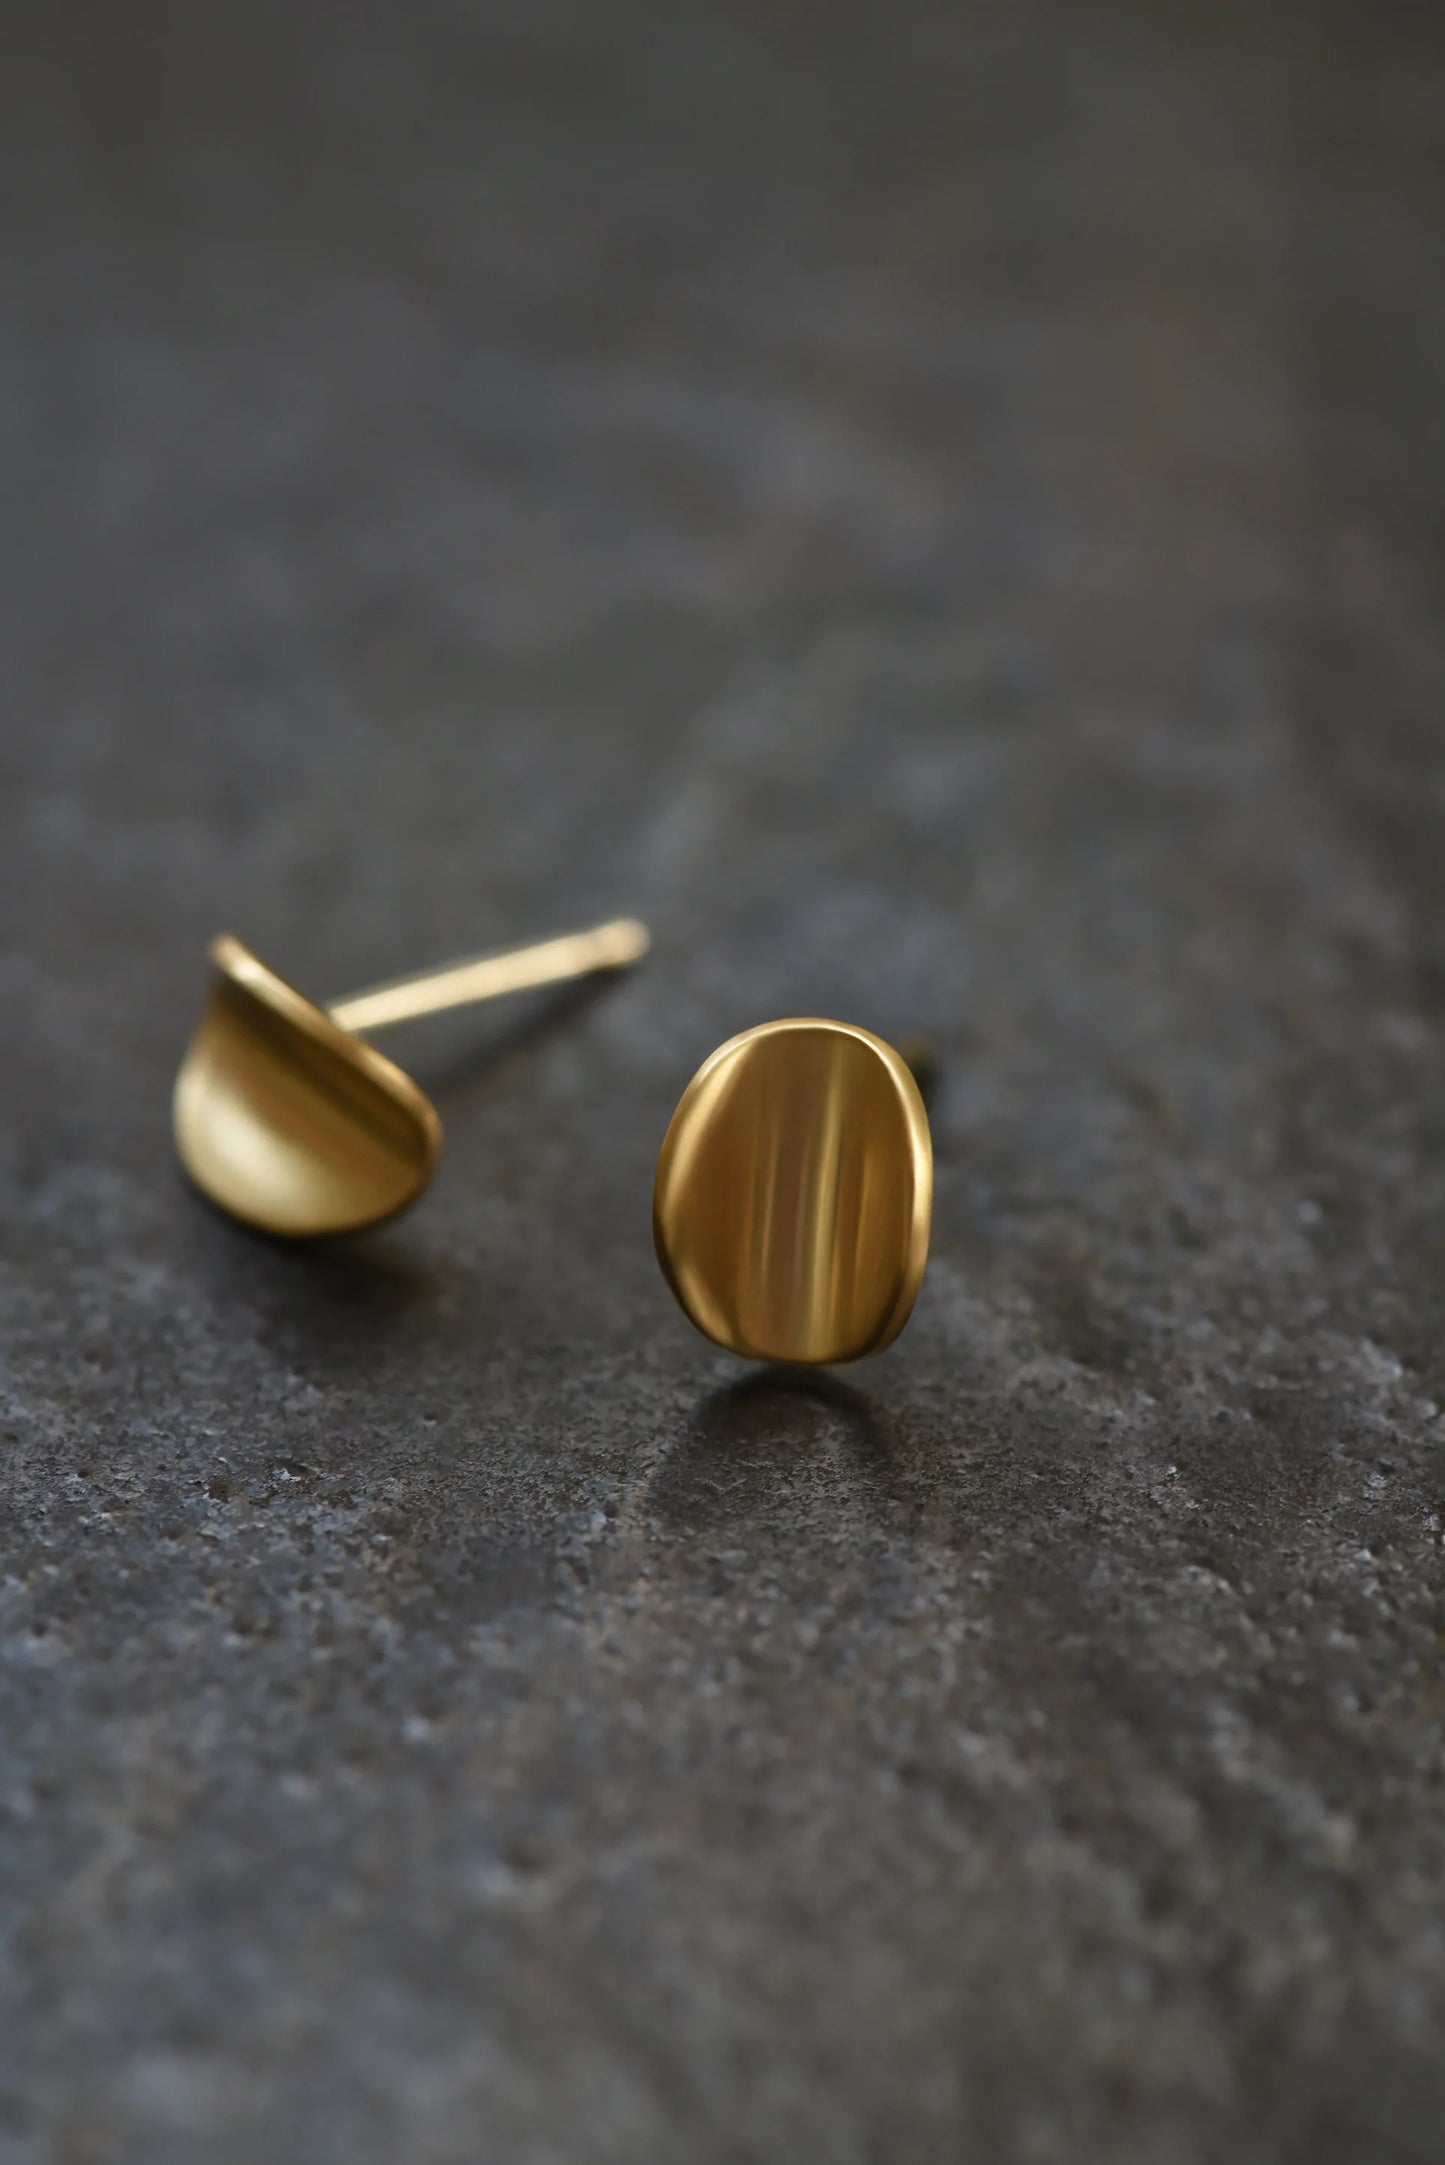 Curved organic shaped gold earring studs.